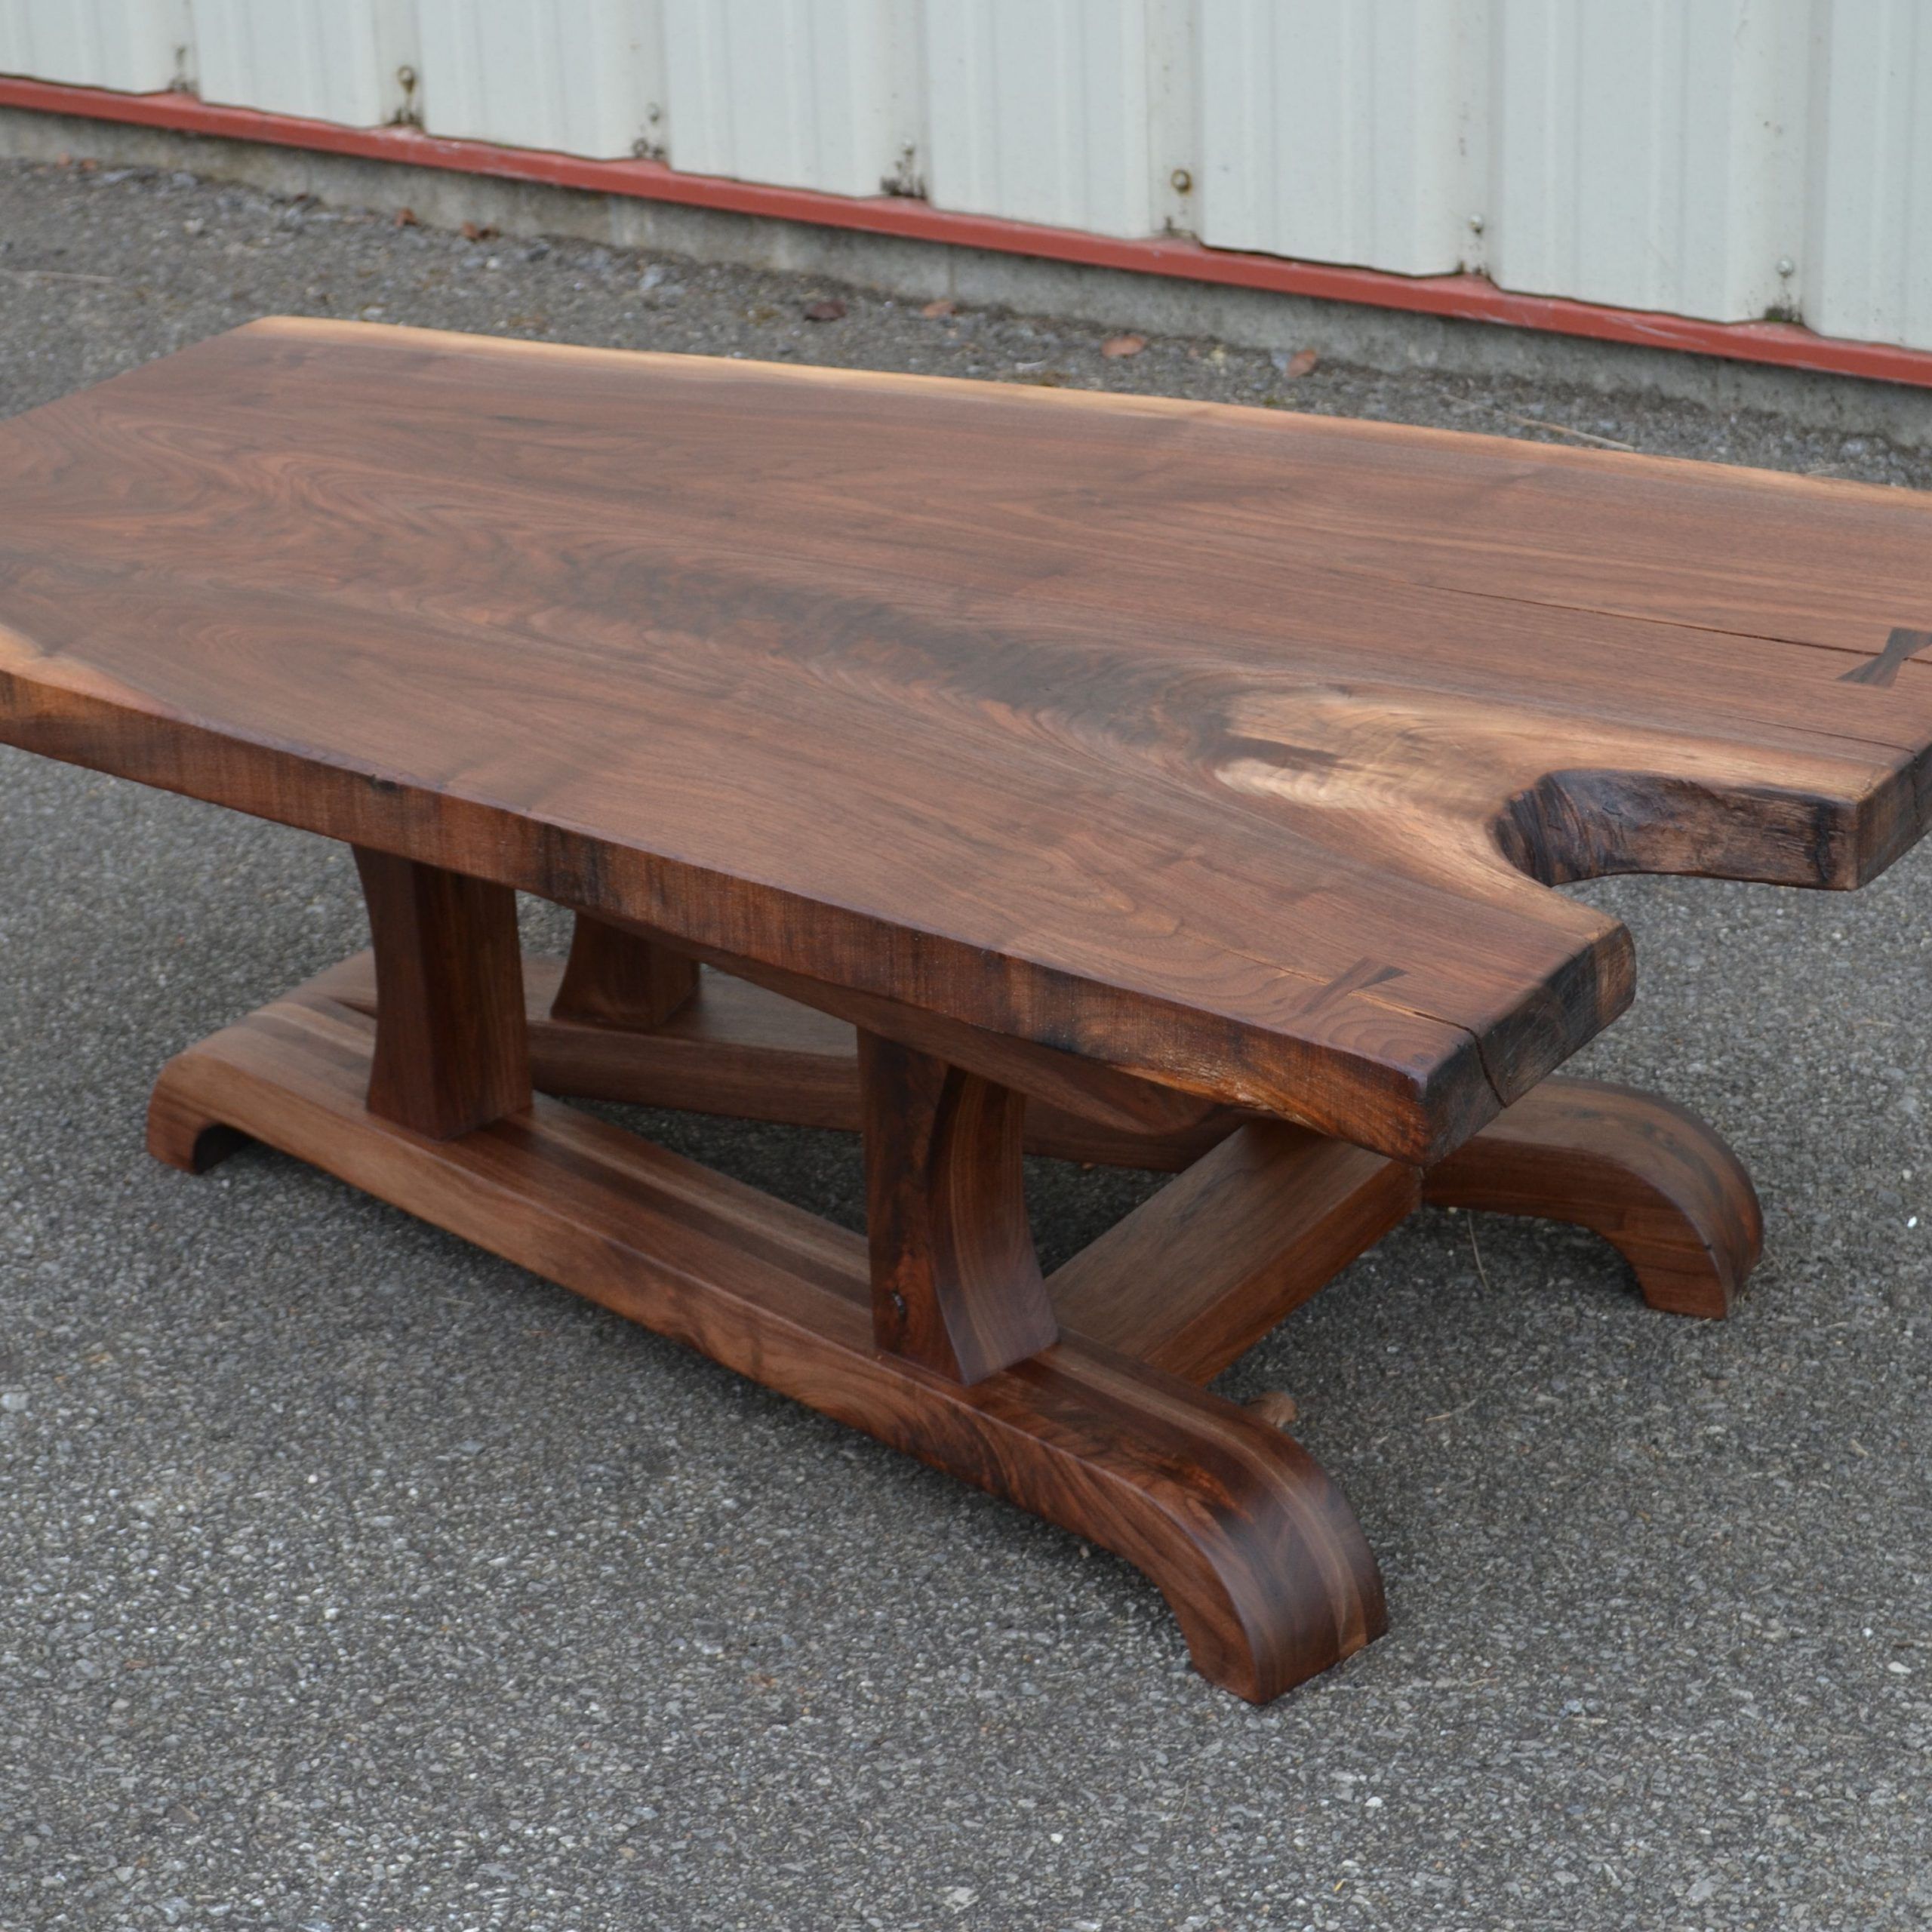 Popular Walnut Coffee Tables Regarding Buy A Custom Live Edge Walnut Coffee Table With Tapered (View 3 of 20)